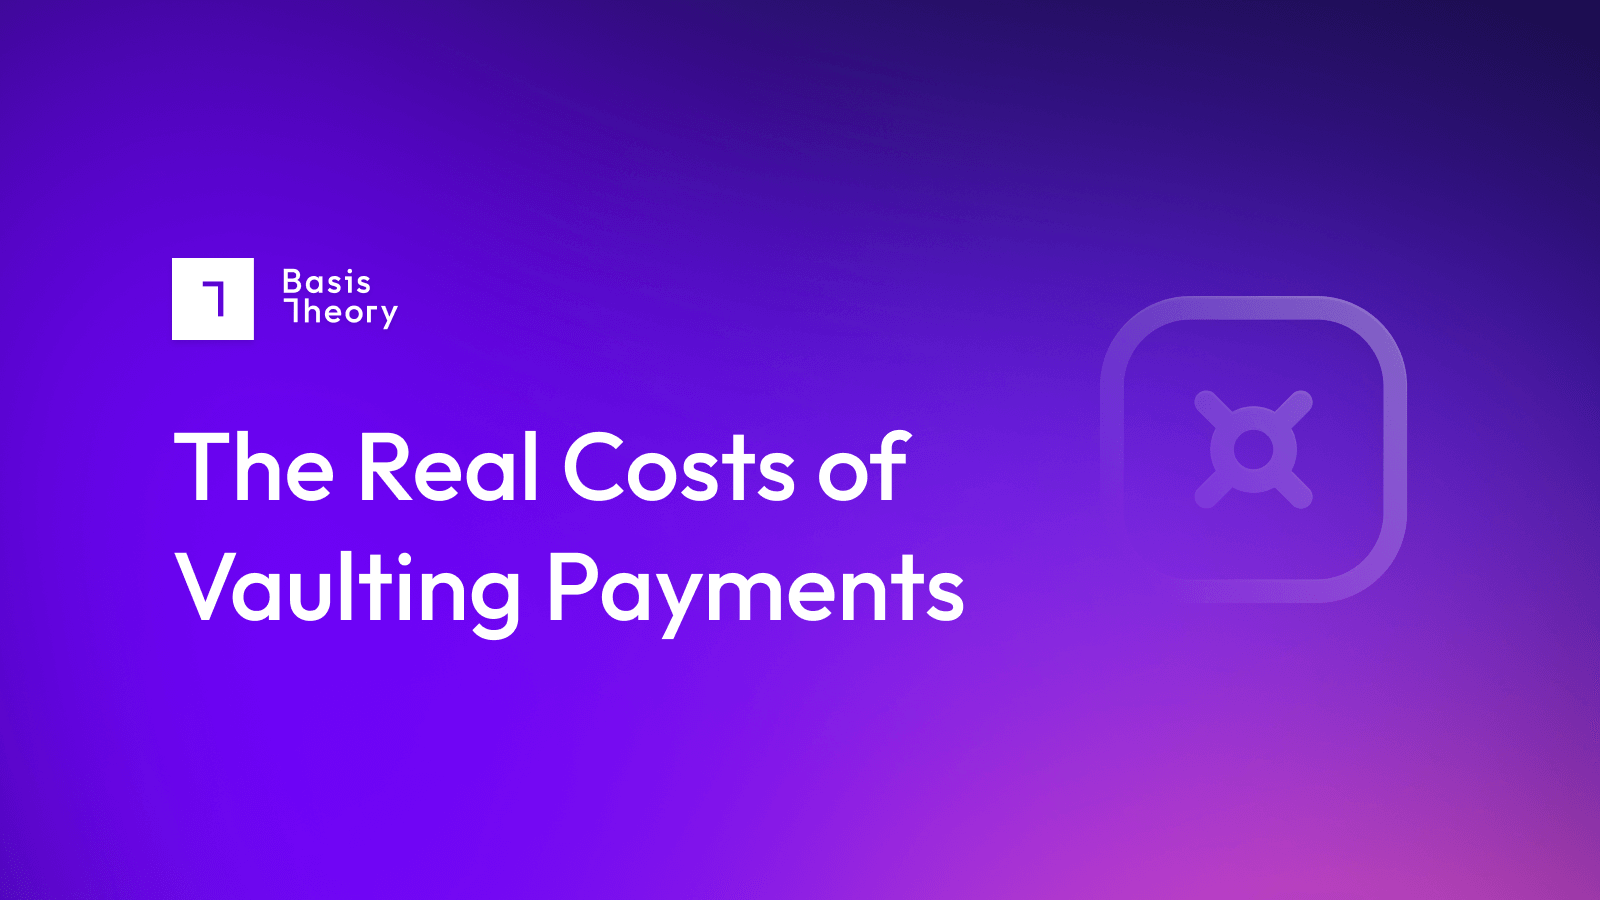 The Real Costs of Vaulting Payments